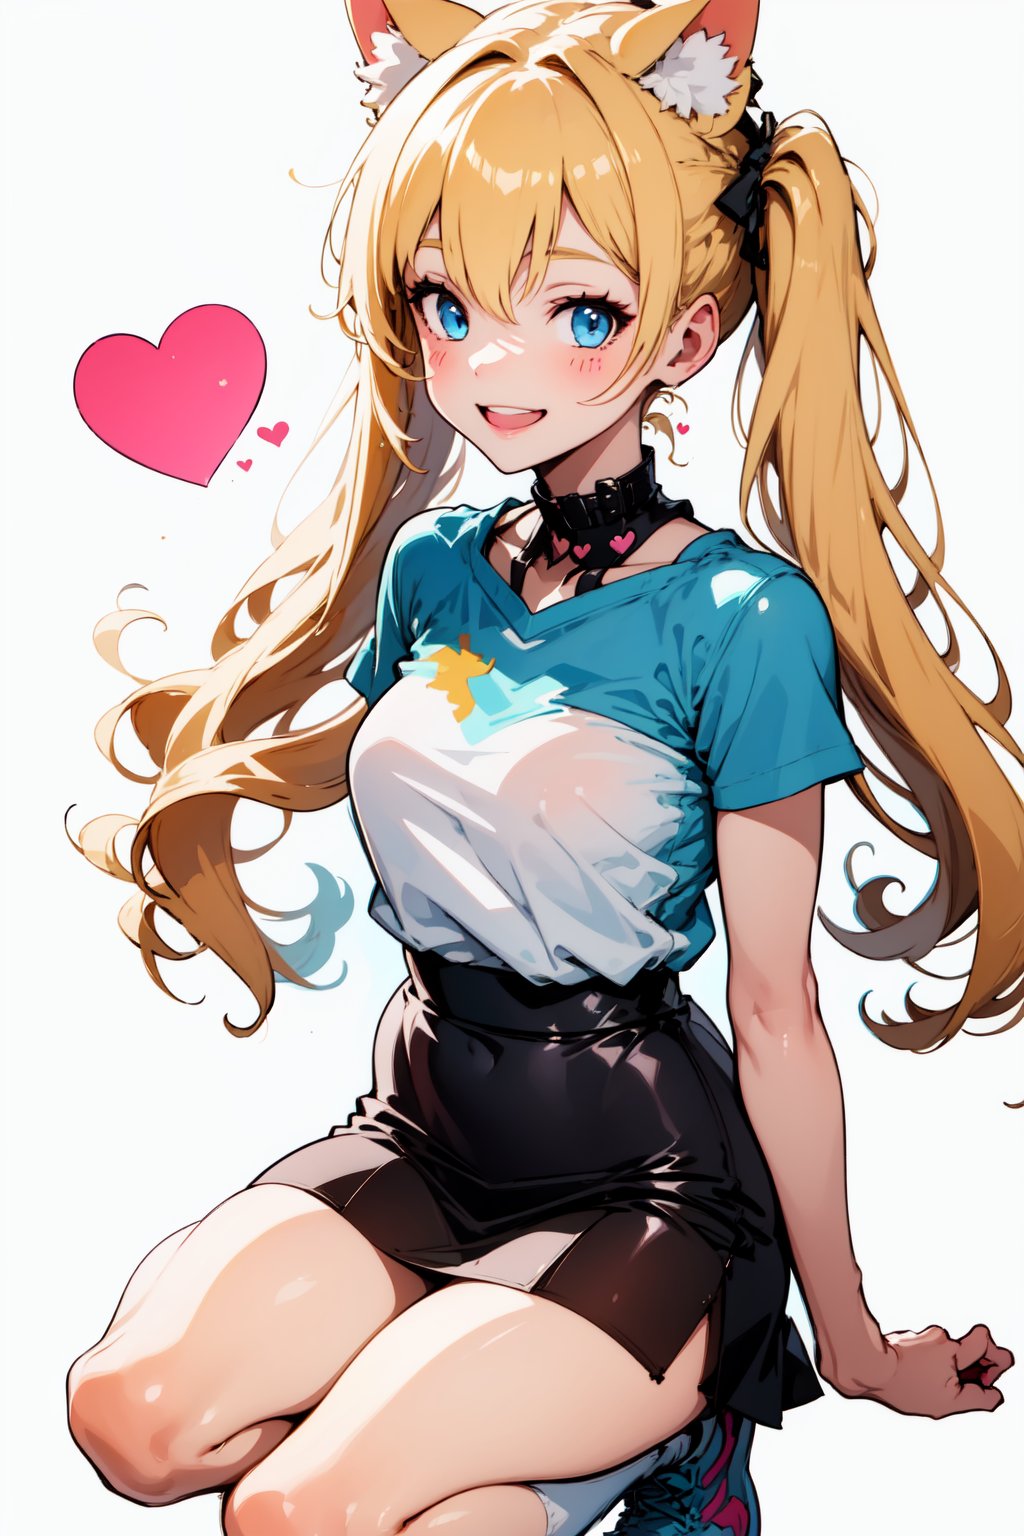 2girls, cute cat girls, White background. she wears a light blue outfit (shirt, skirt), long blonde hair. little body, full body character. masterpiece. she is happy, smiling. twintails hairstyle, masterpiece, hearts on the sides. cat ears. looking at viewer., Chibi